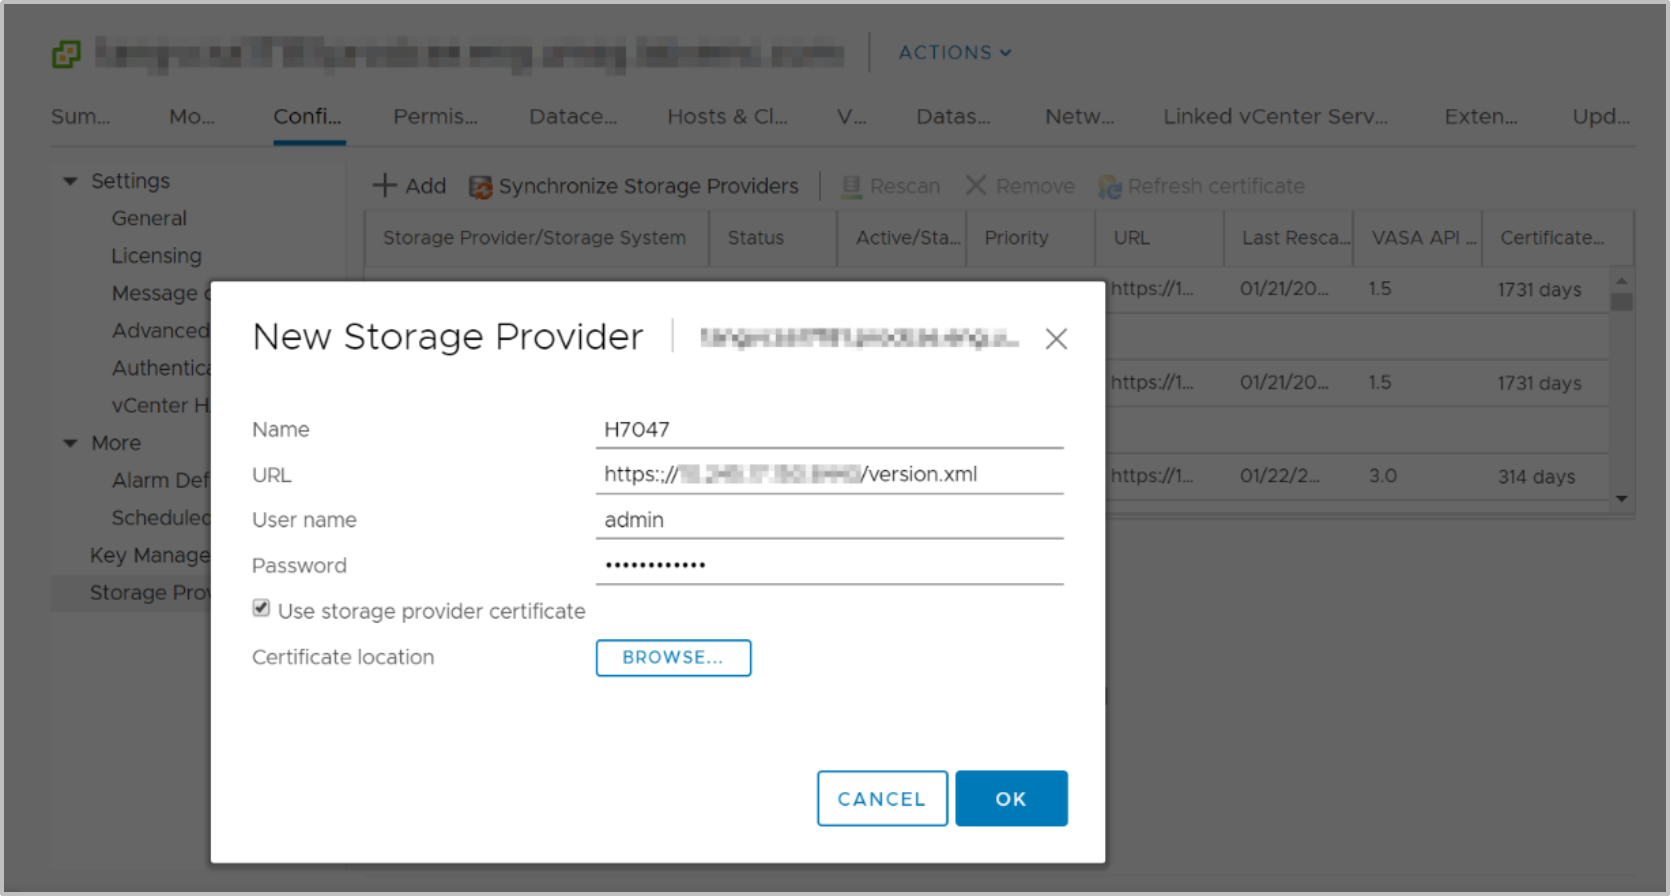 A screenshot of vCenter showing the new VASA provider registration form.